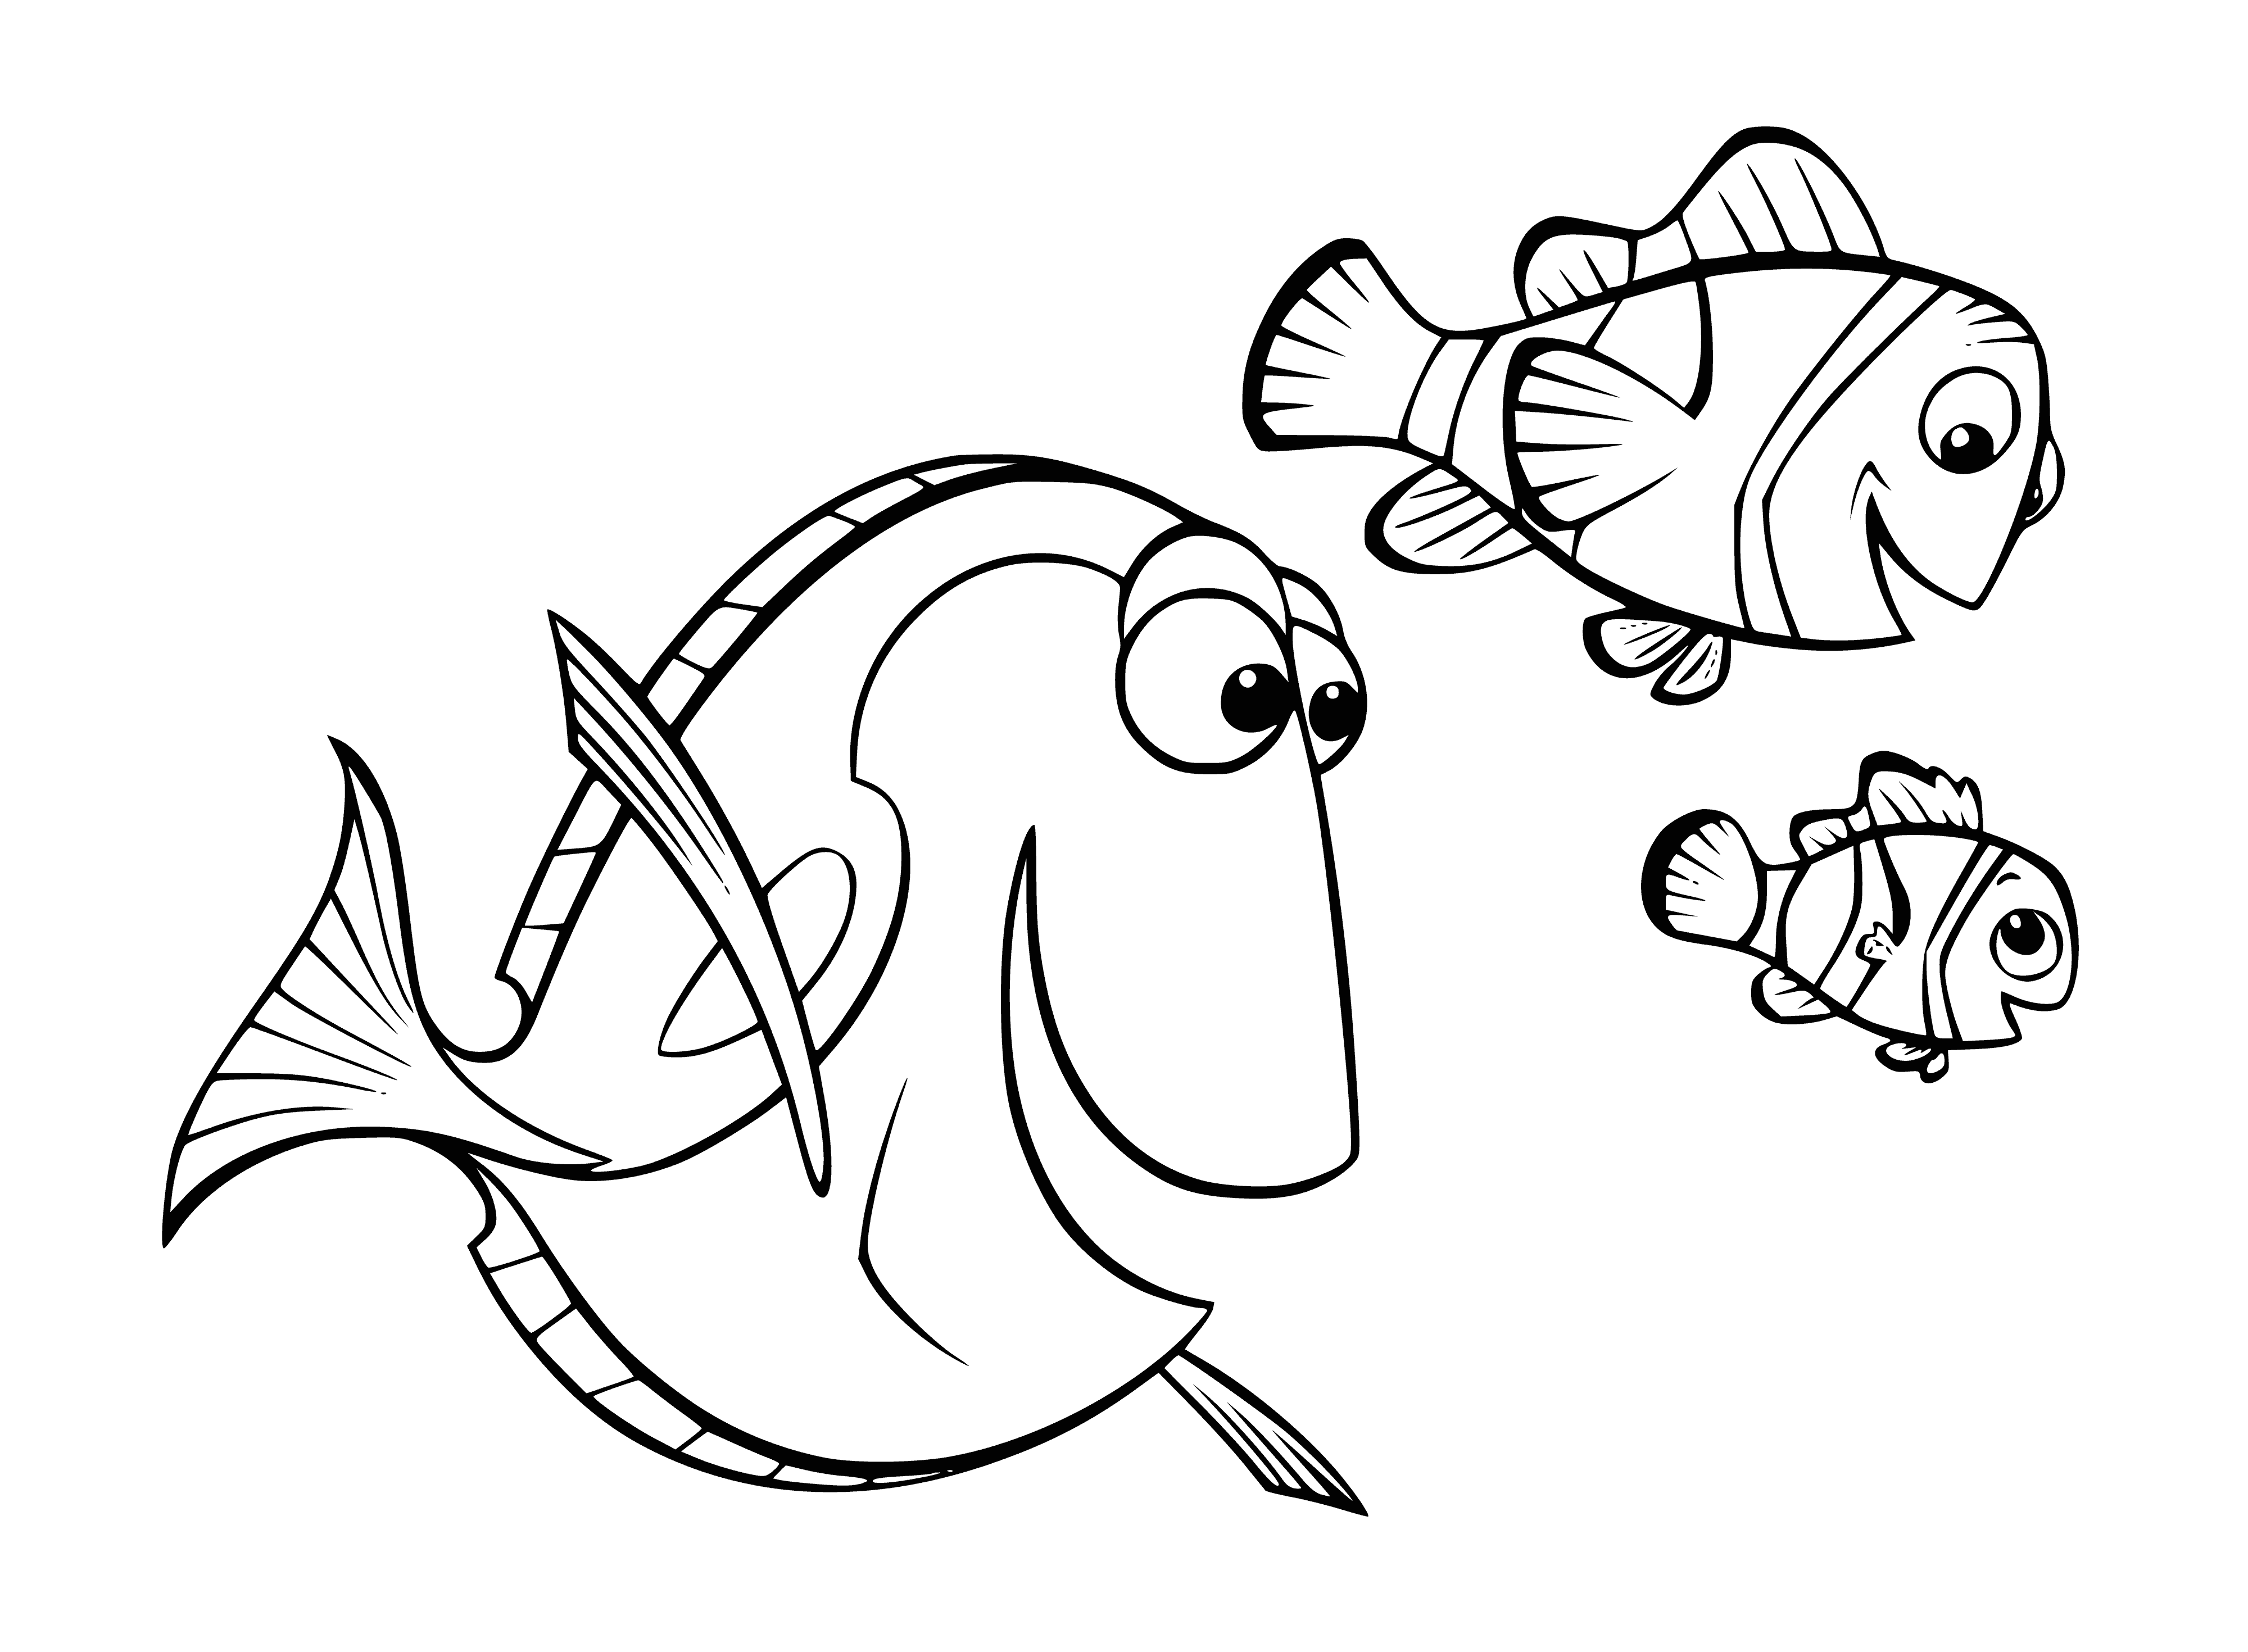 Come on, Nemo and the Pope coloring page